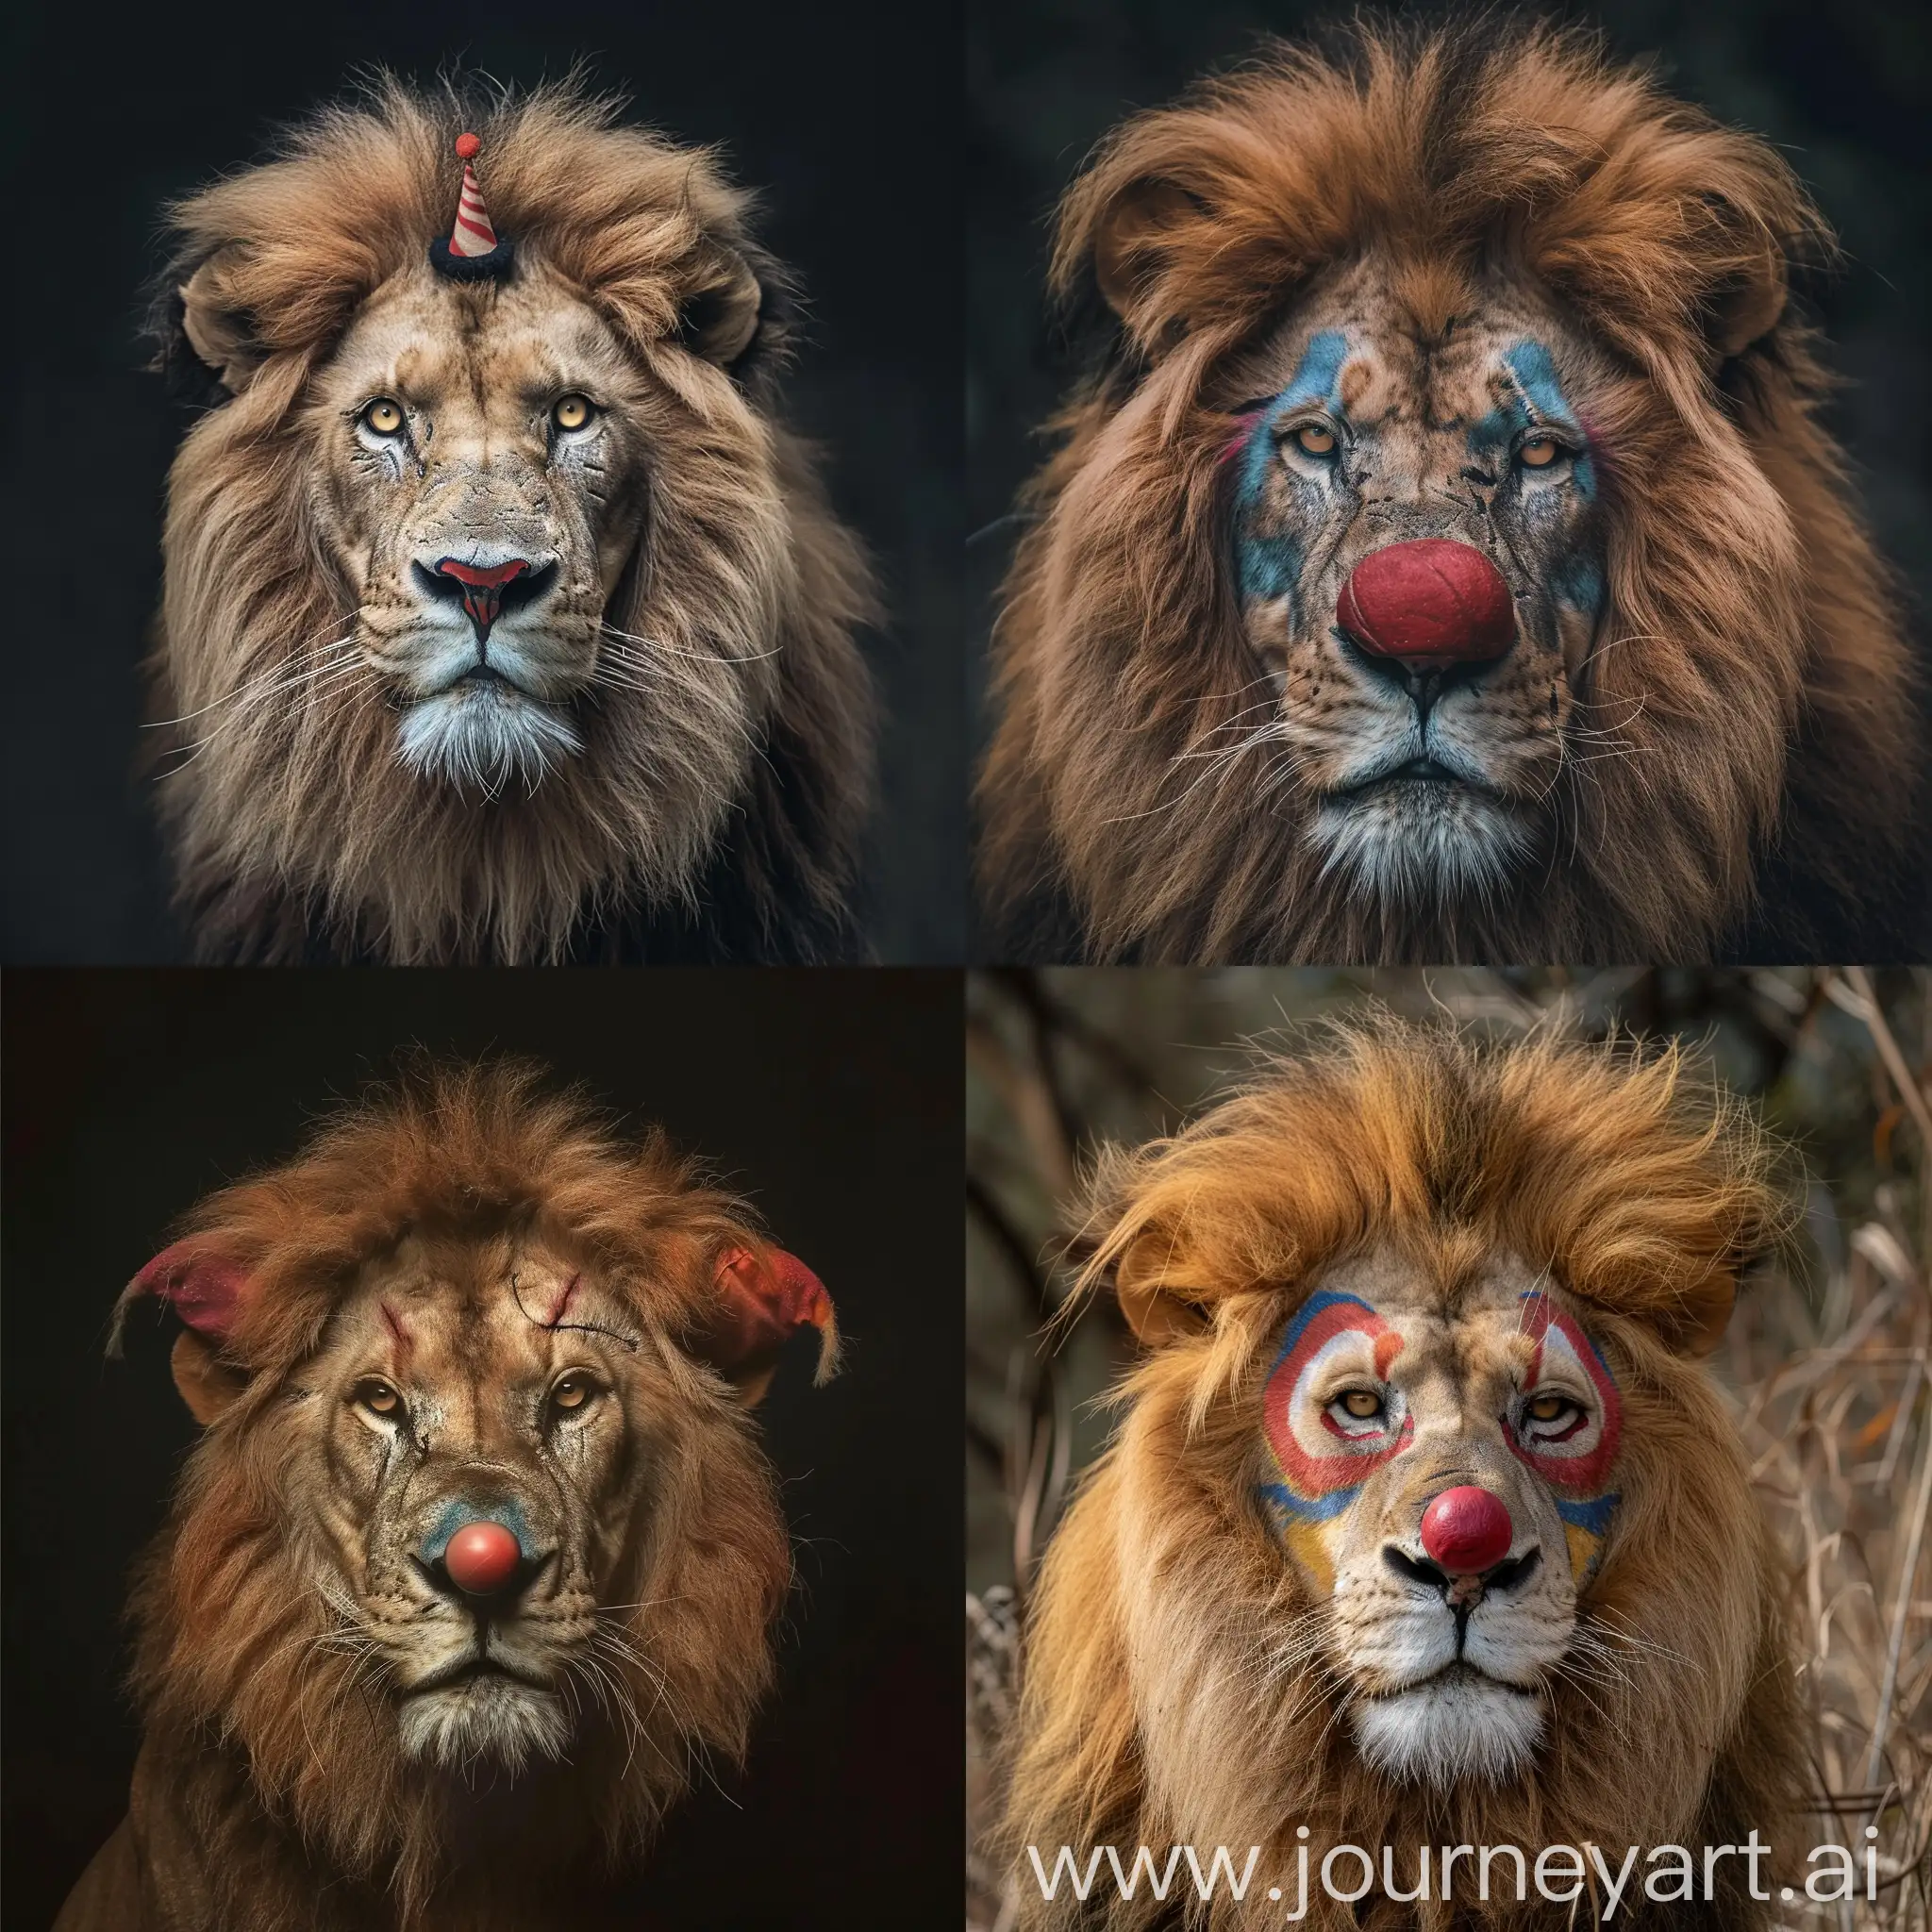 Lion-with-Clown-Face-Playful-and-Whimsical-Animal-Art